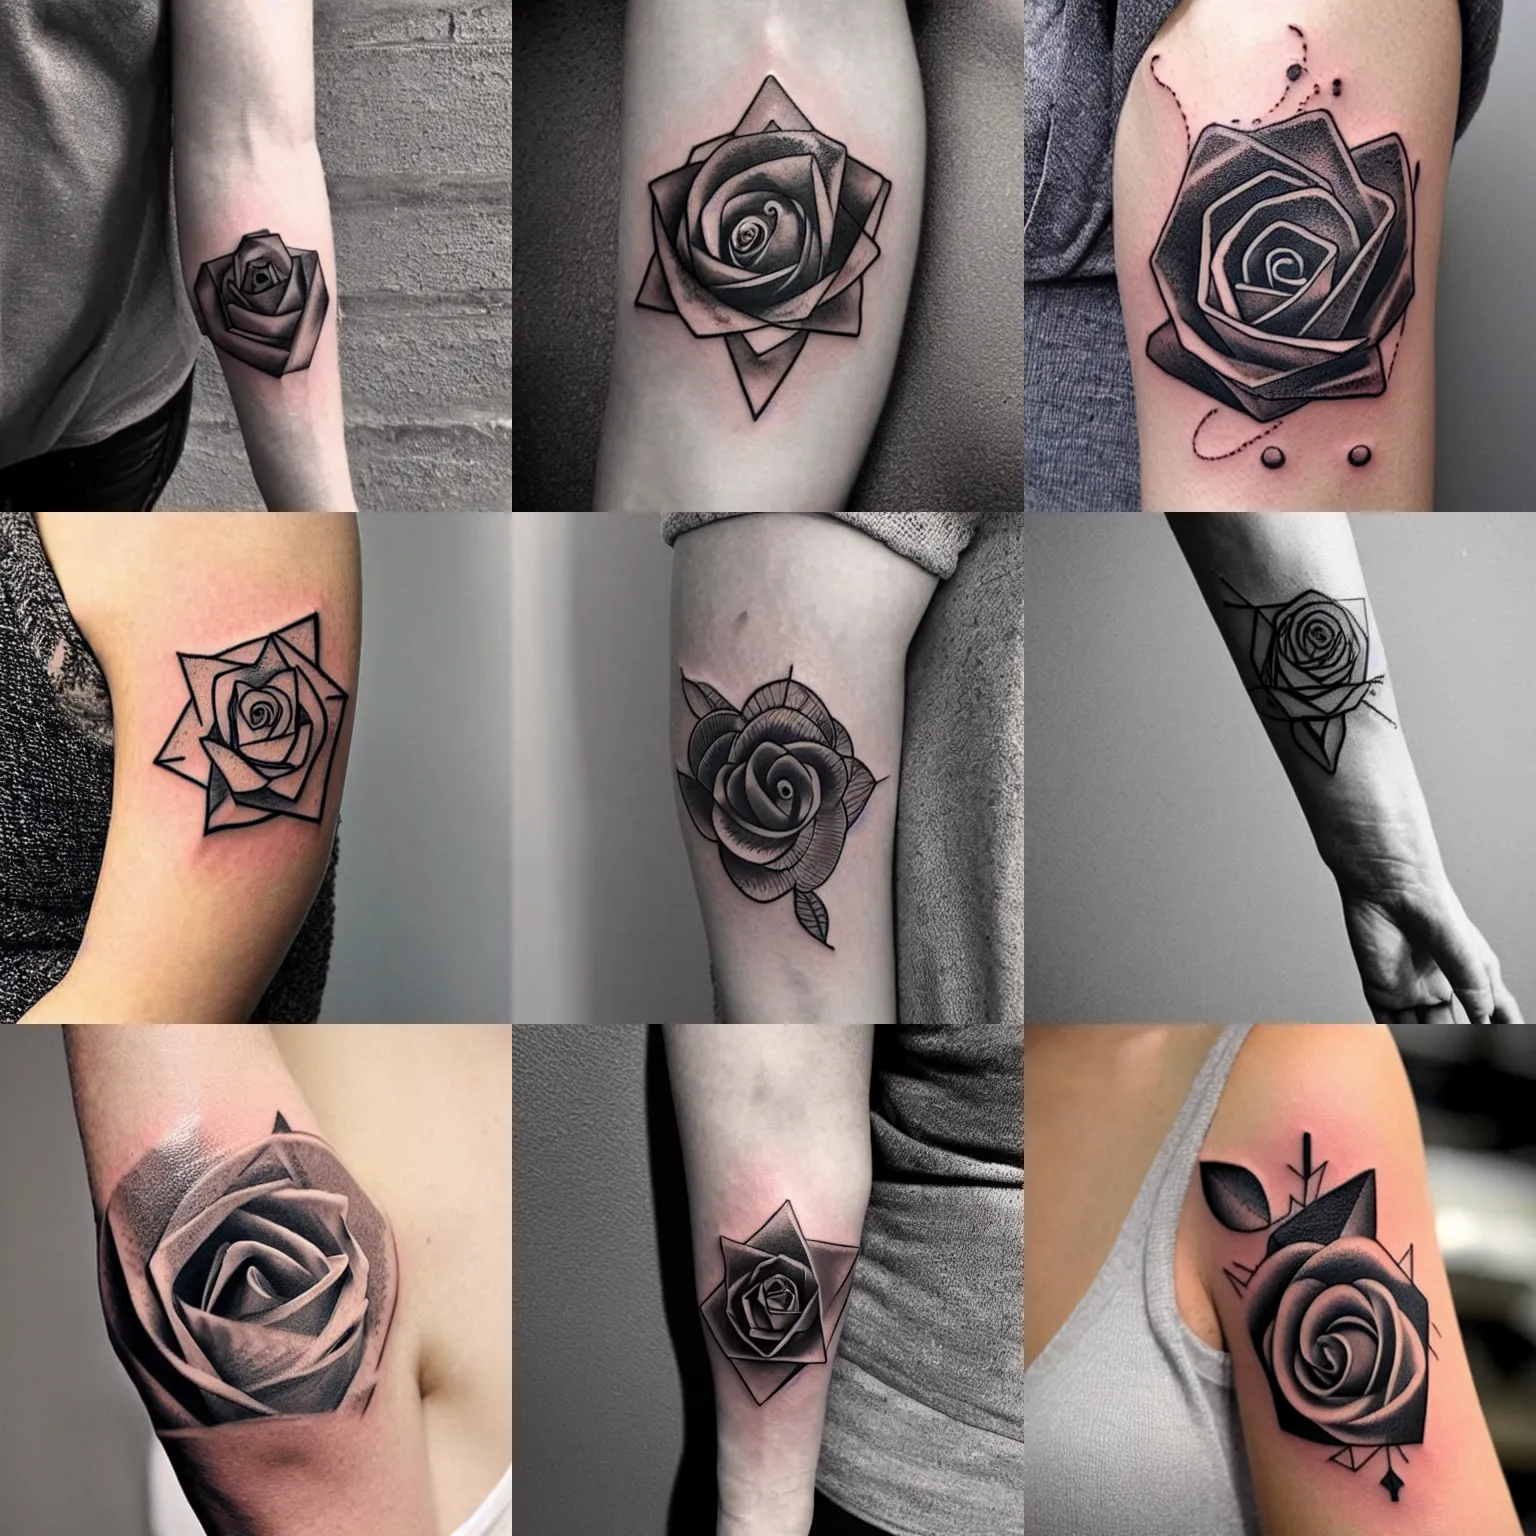 How To Draw A Rose Tattoo Step By Step!